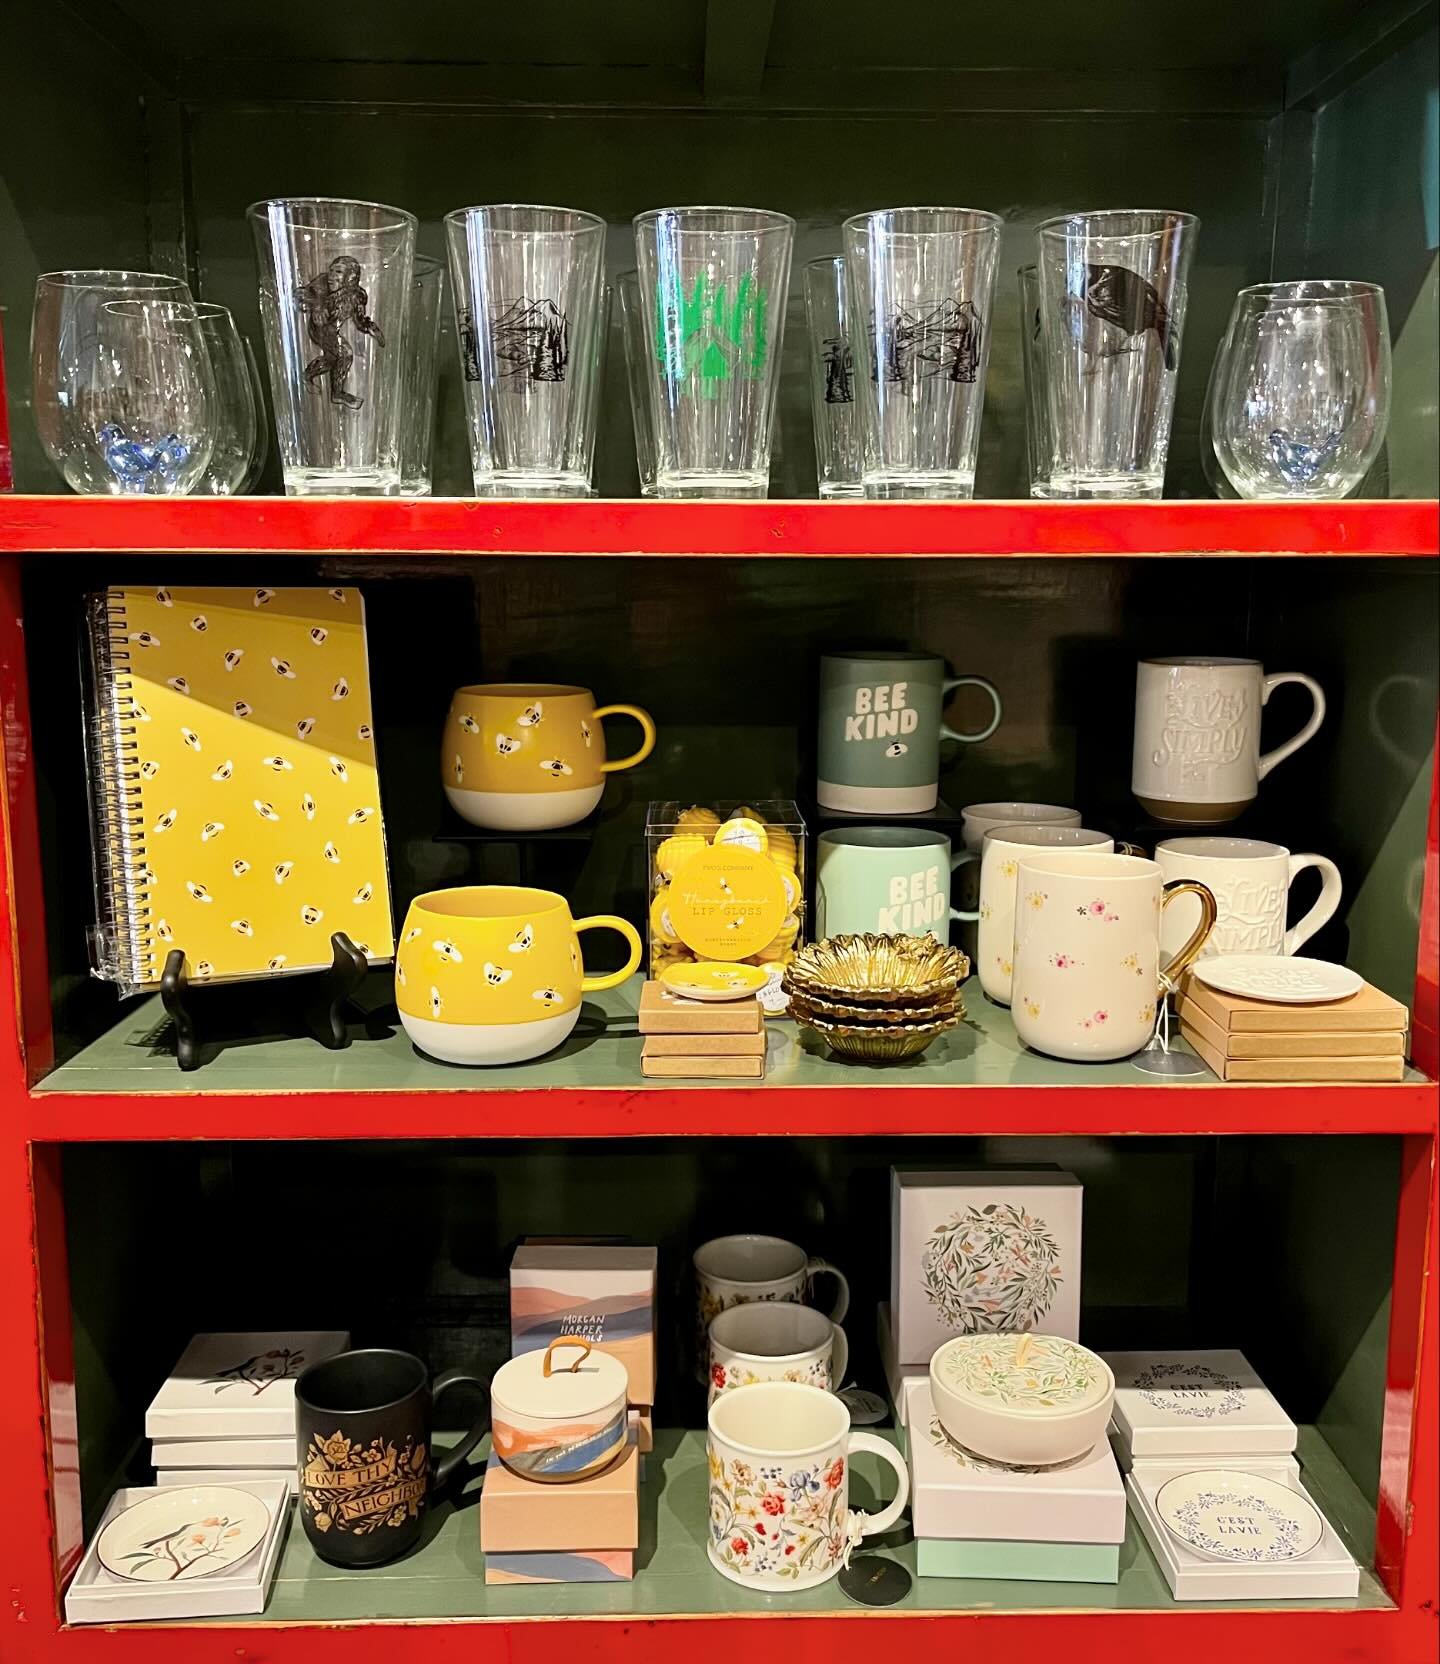 We have some fun pint glasses and mugs in right now! #newarrivals #pintglass #mugs #easygifts #shoplocal #theresnoplacelikehome #downtowndurango #durango #colorado